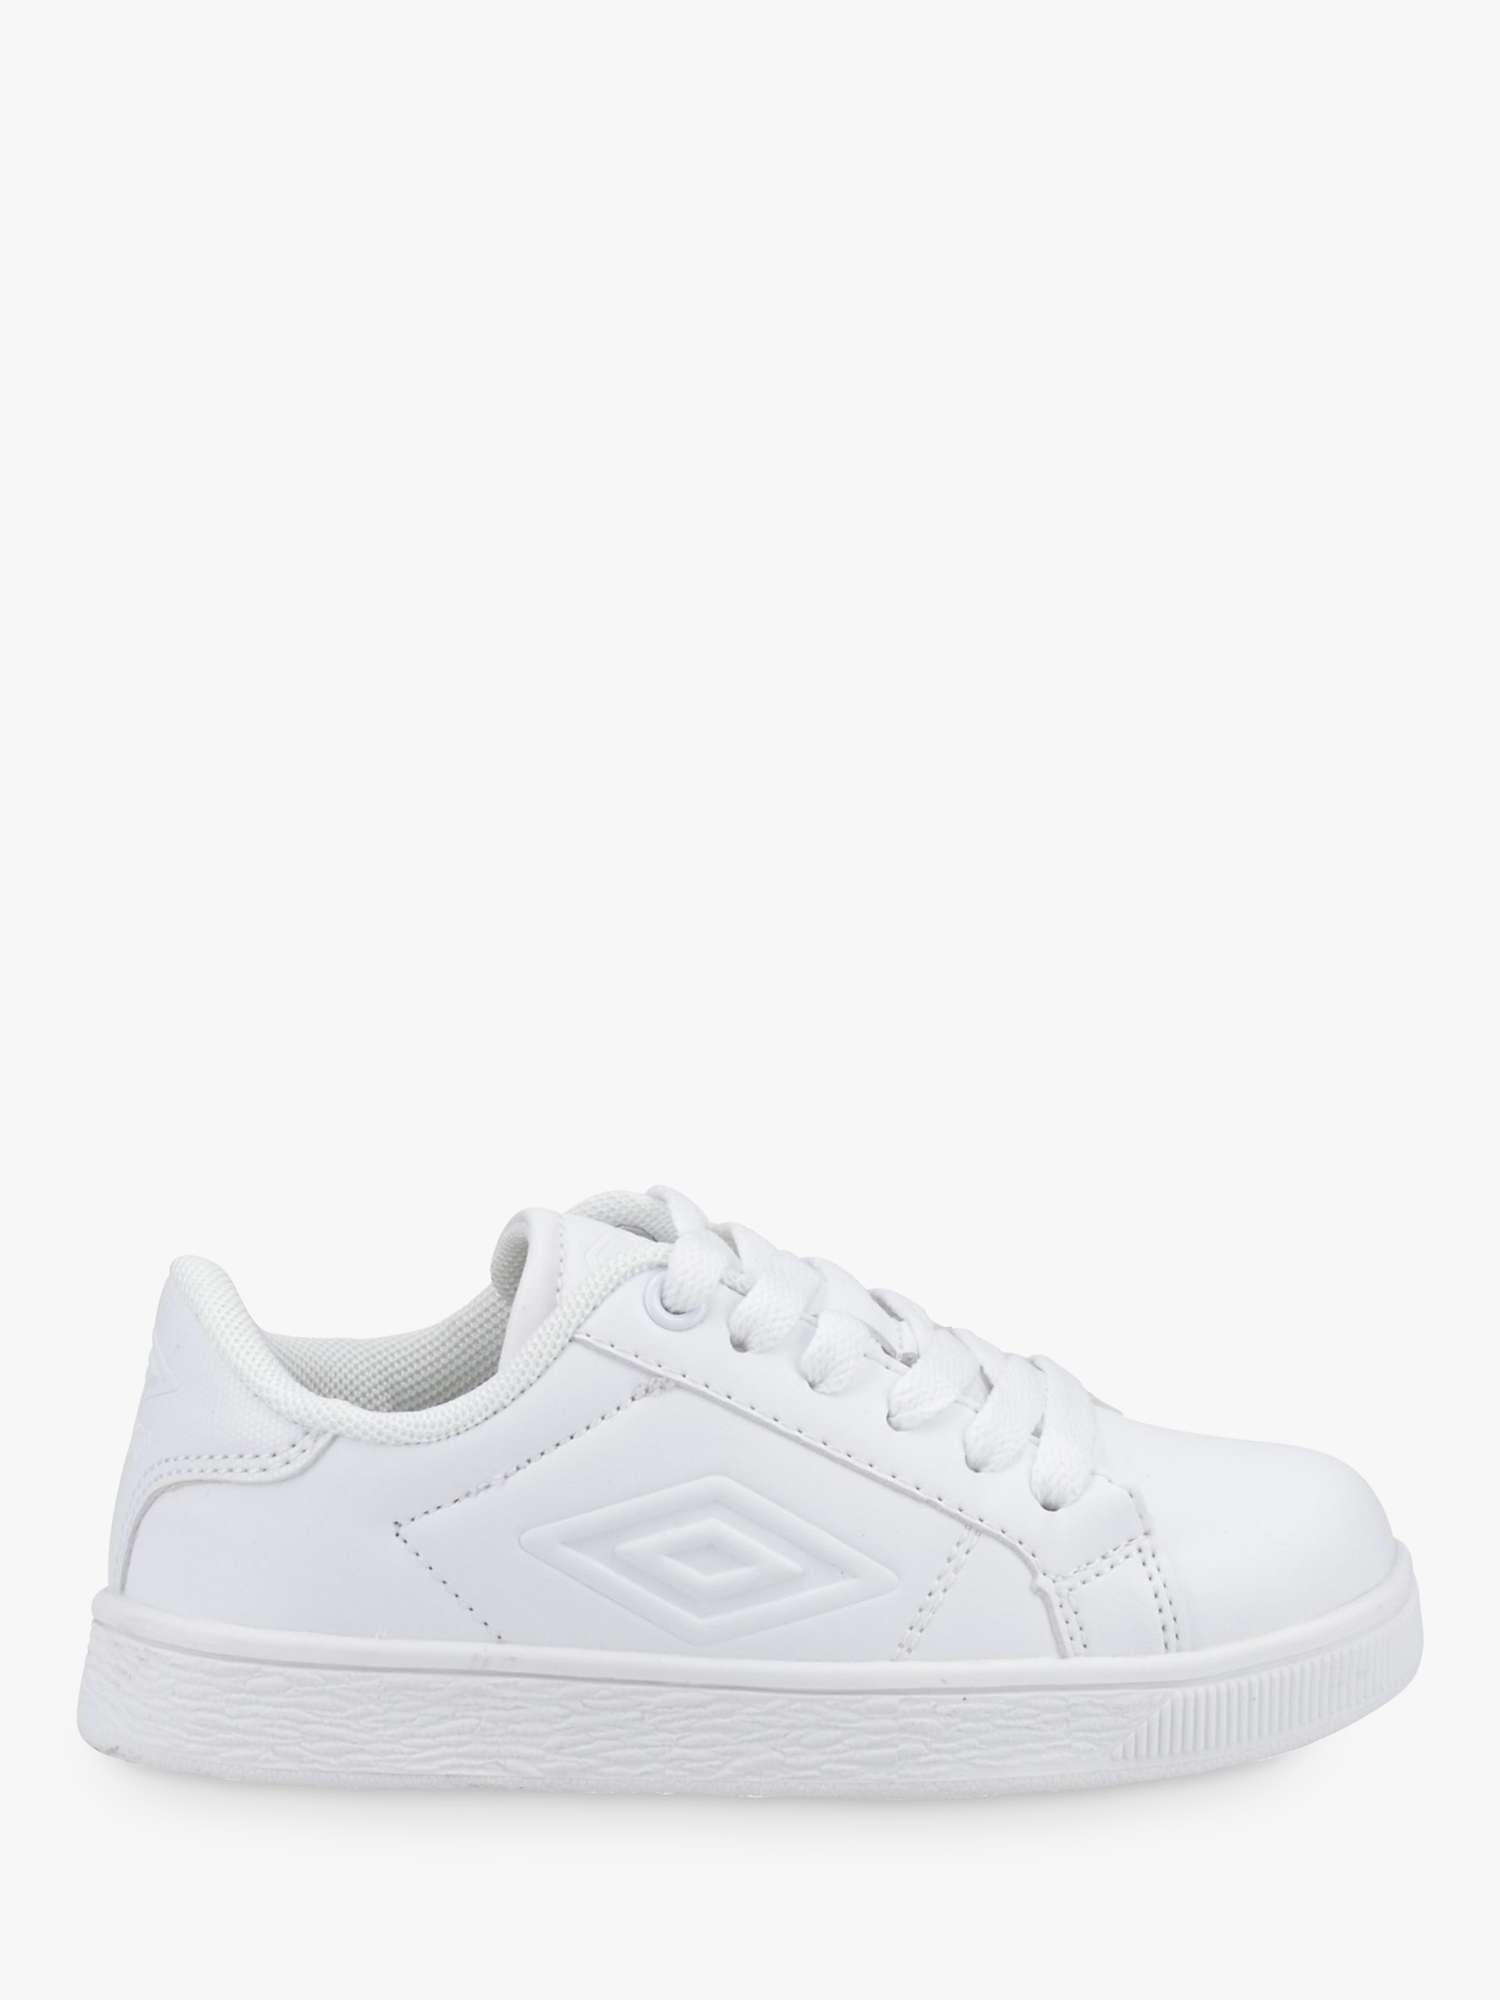 Buy Umbro Kids' Medway V Lace Up Trainers, White Online at johnlewis.com